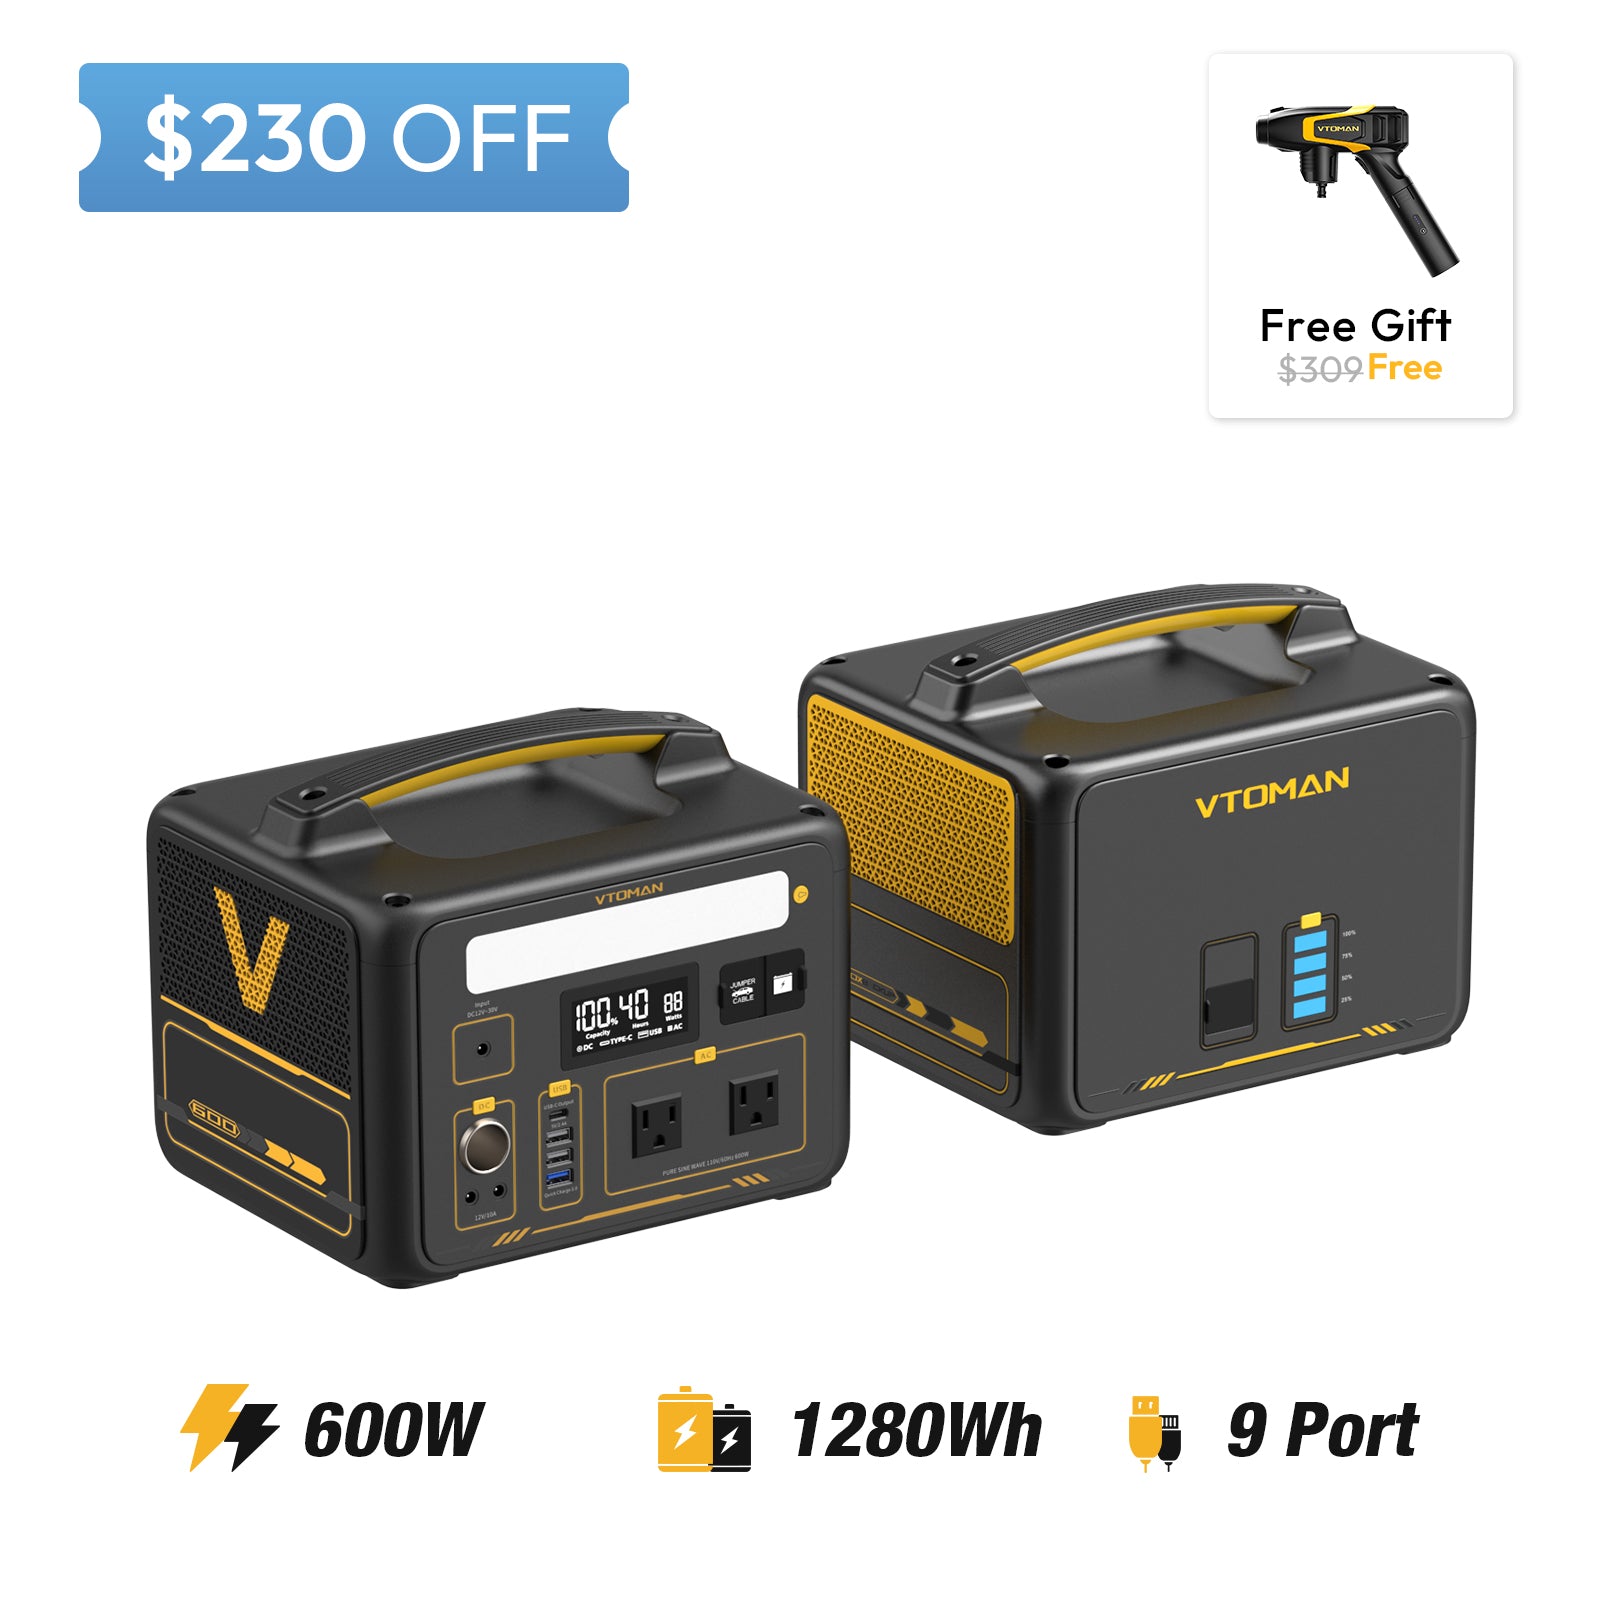 jump 600 and 640wh extra battery save $230 in summer sale